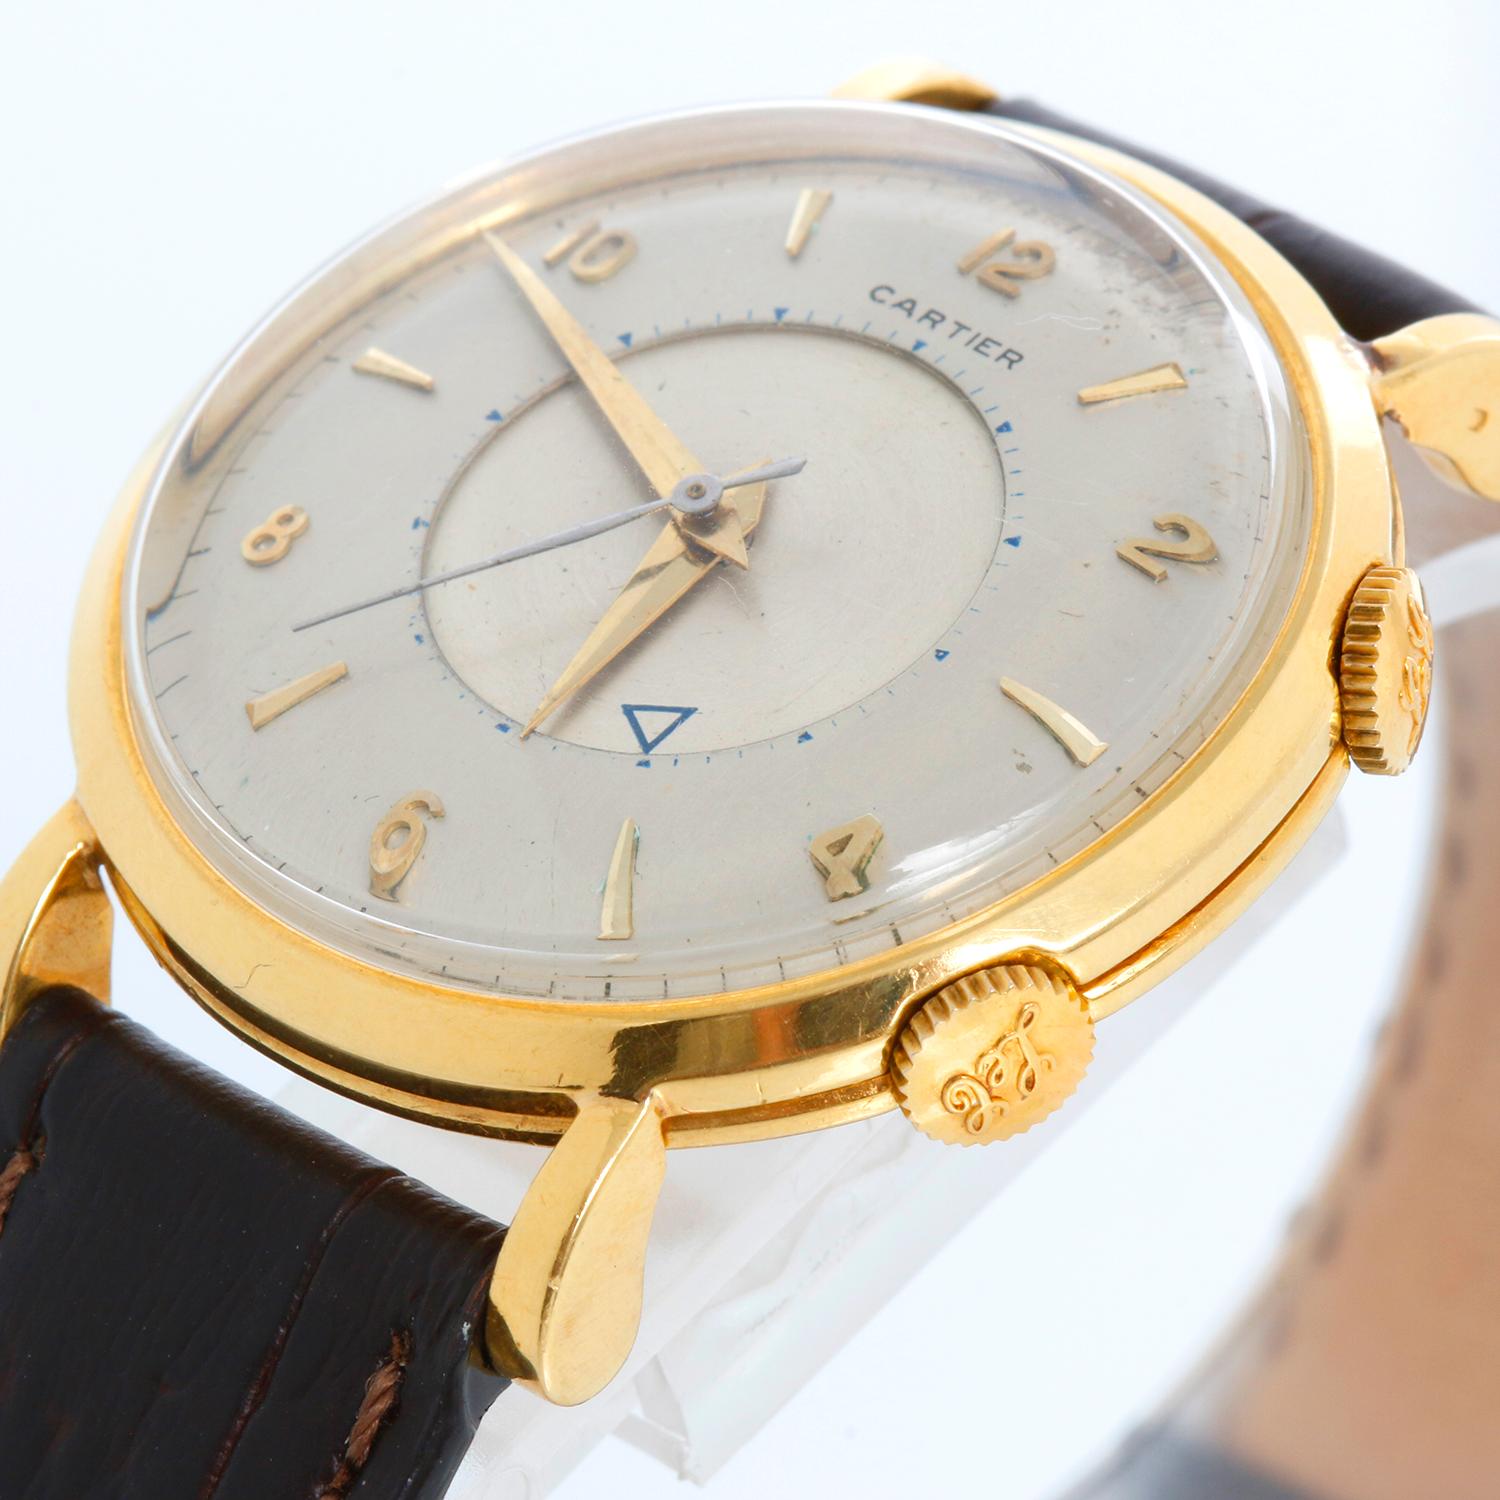 Cartier Extremely Rare 18k 'E.W.C' Alarm Watch with Hollywood Providence In Excellent Condition For Sale In Dallas, TX